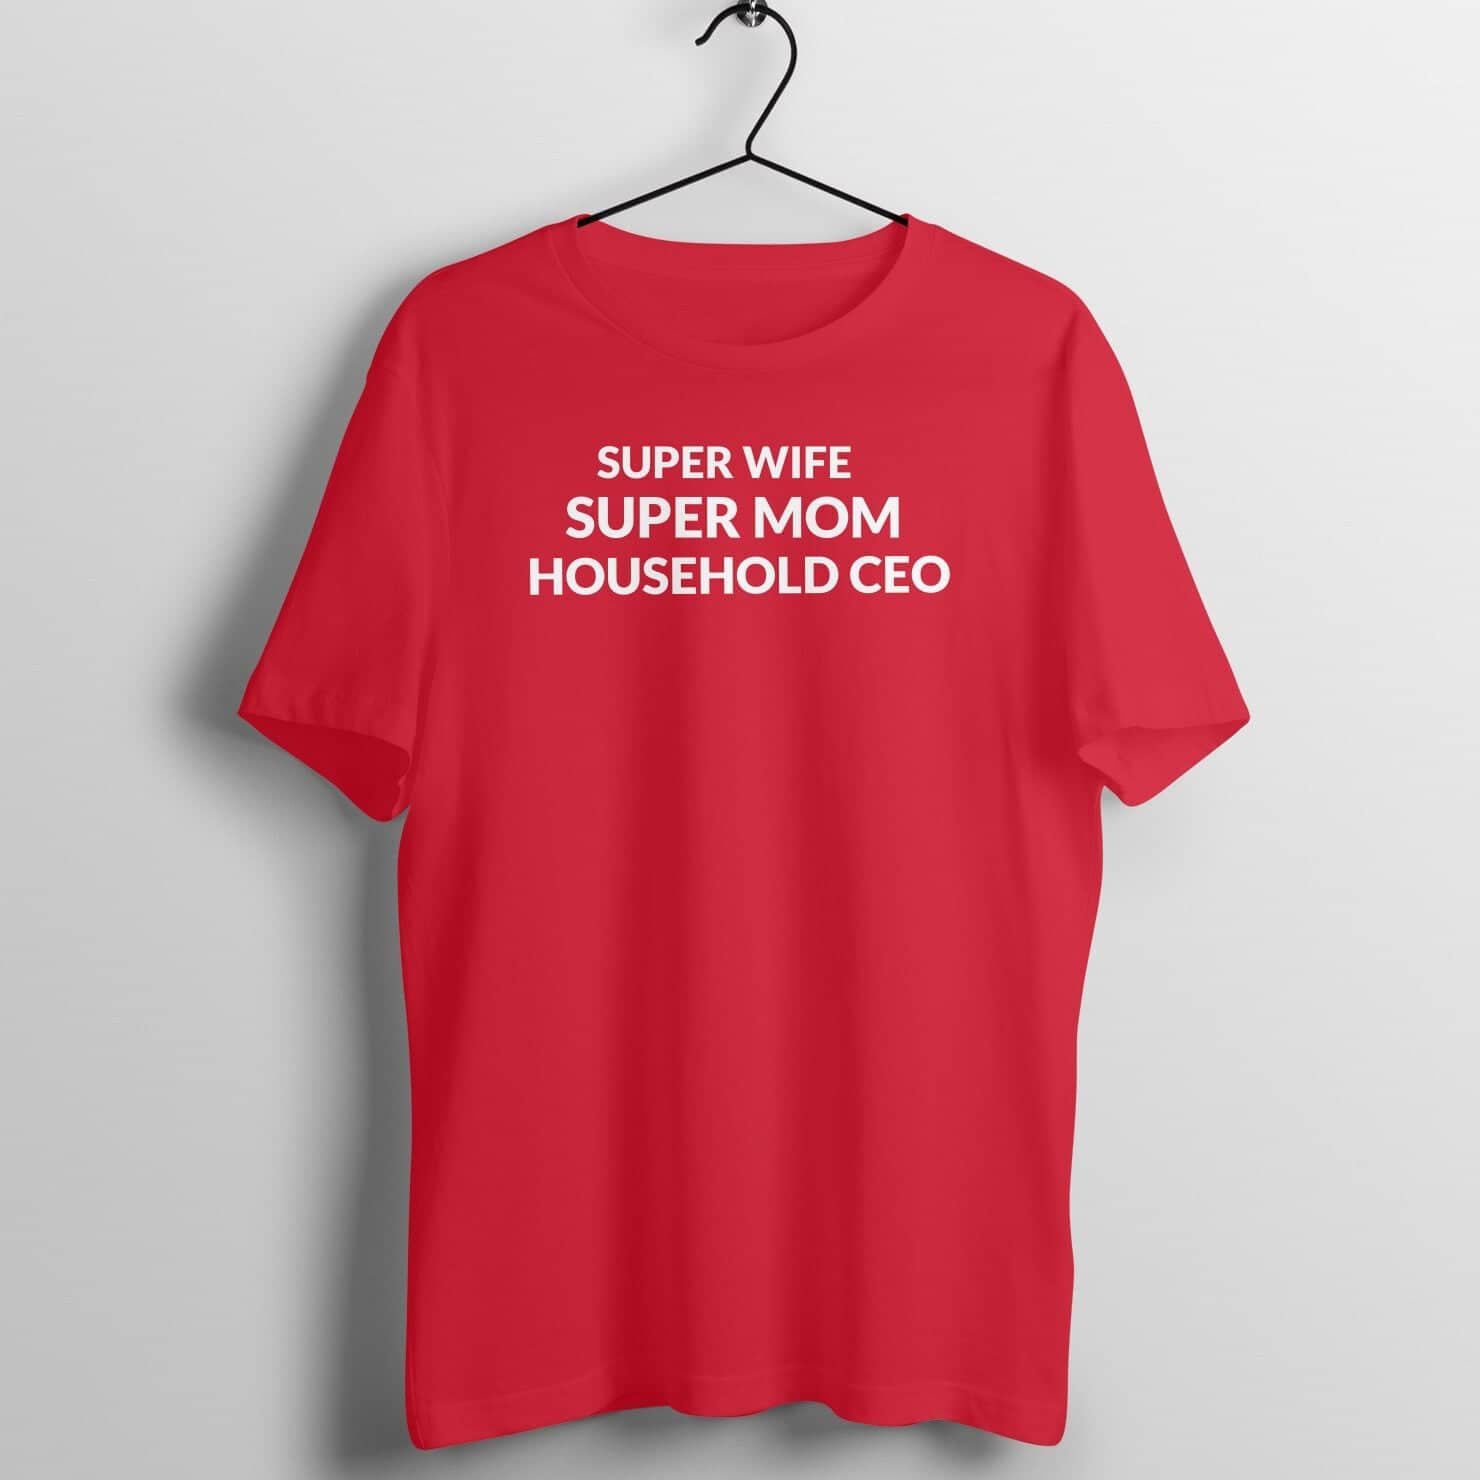 Super Wife Super Mom Household CEO Special Appreciation T Shirt for Women freeshipping - Catch My Drift India